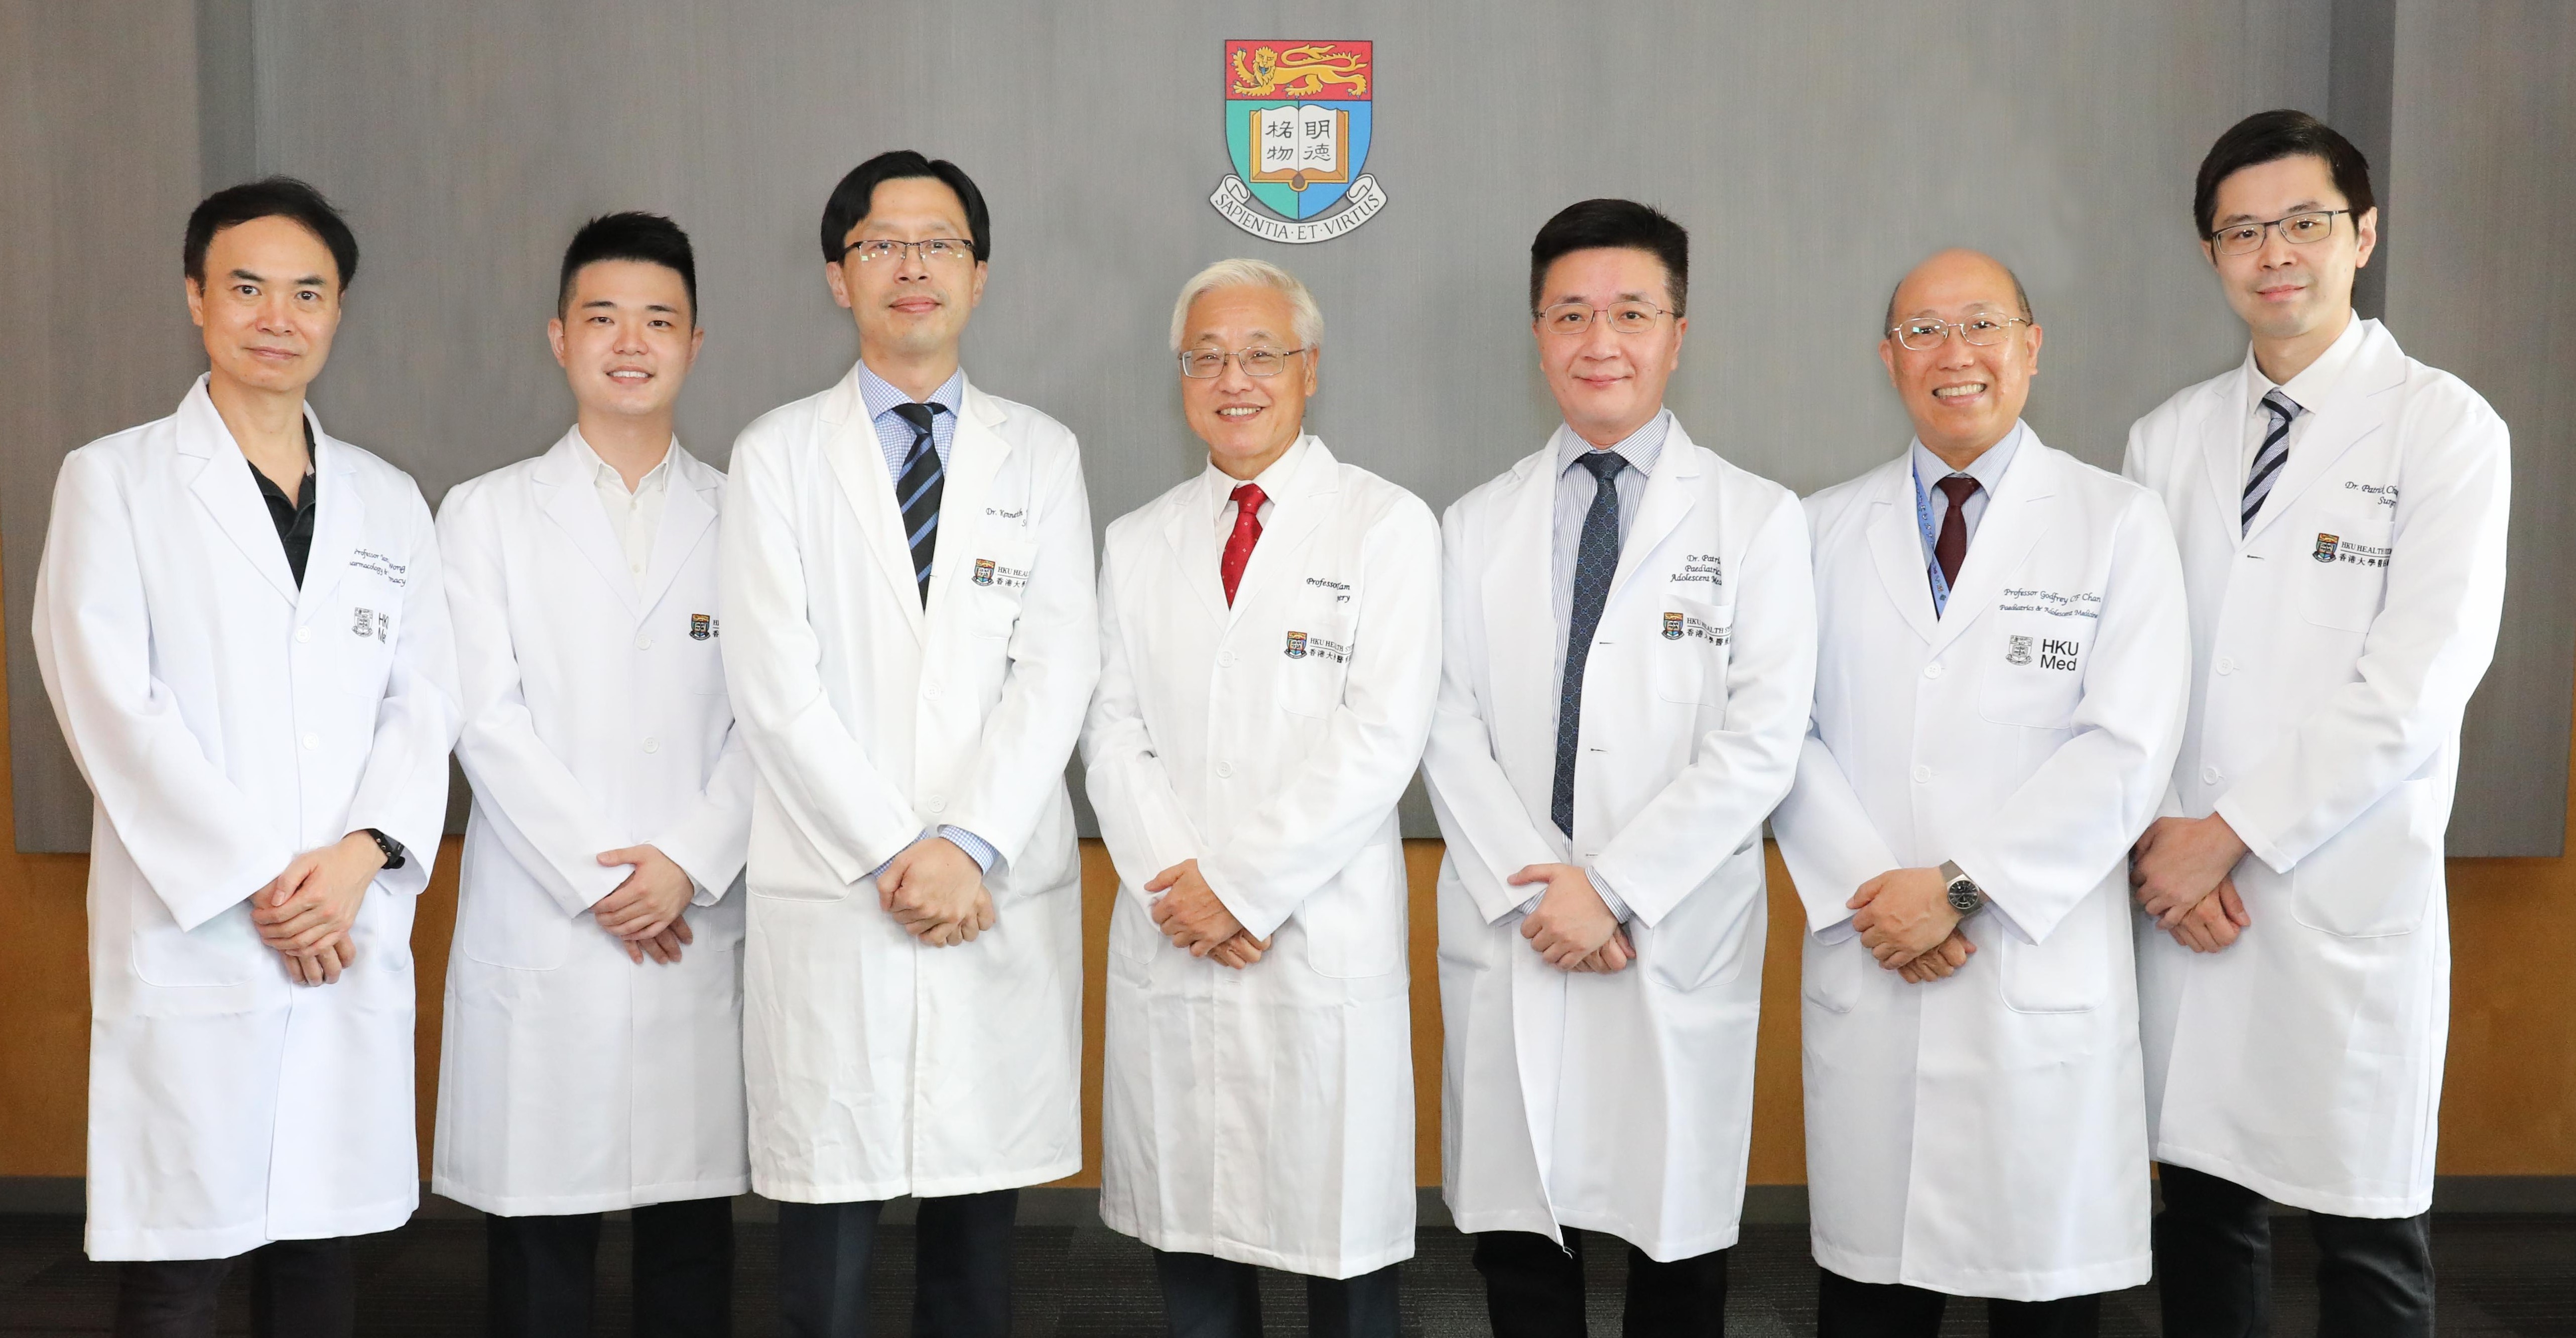 The research team from HKUMed, including Professor Ian Wong, Professor Paul Tam, Professor Godfrey Chan, and others.